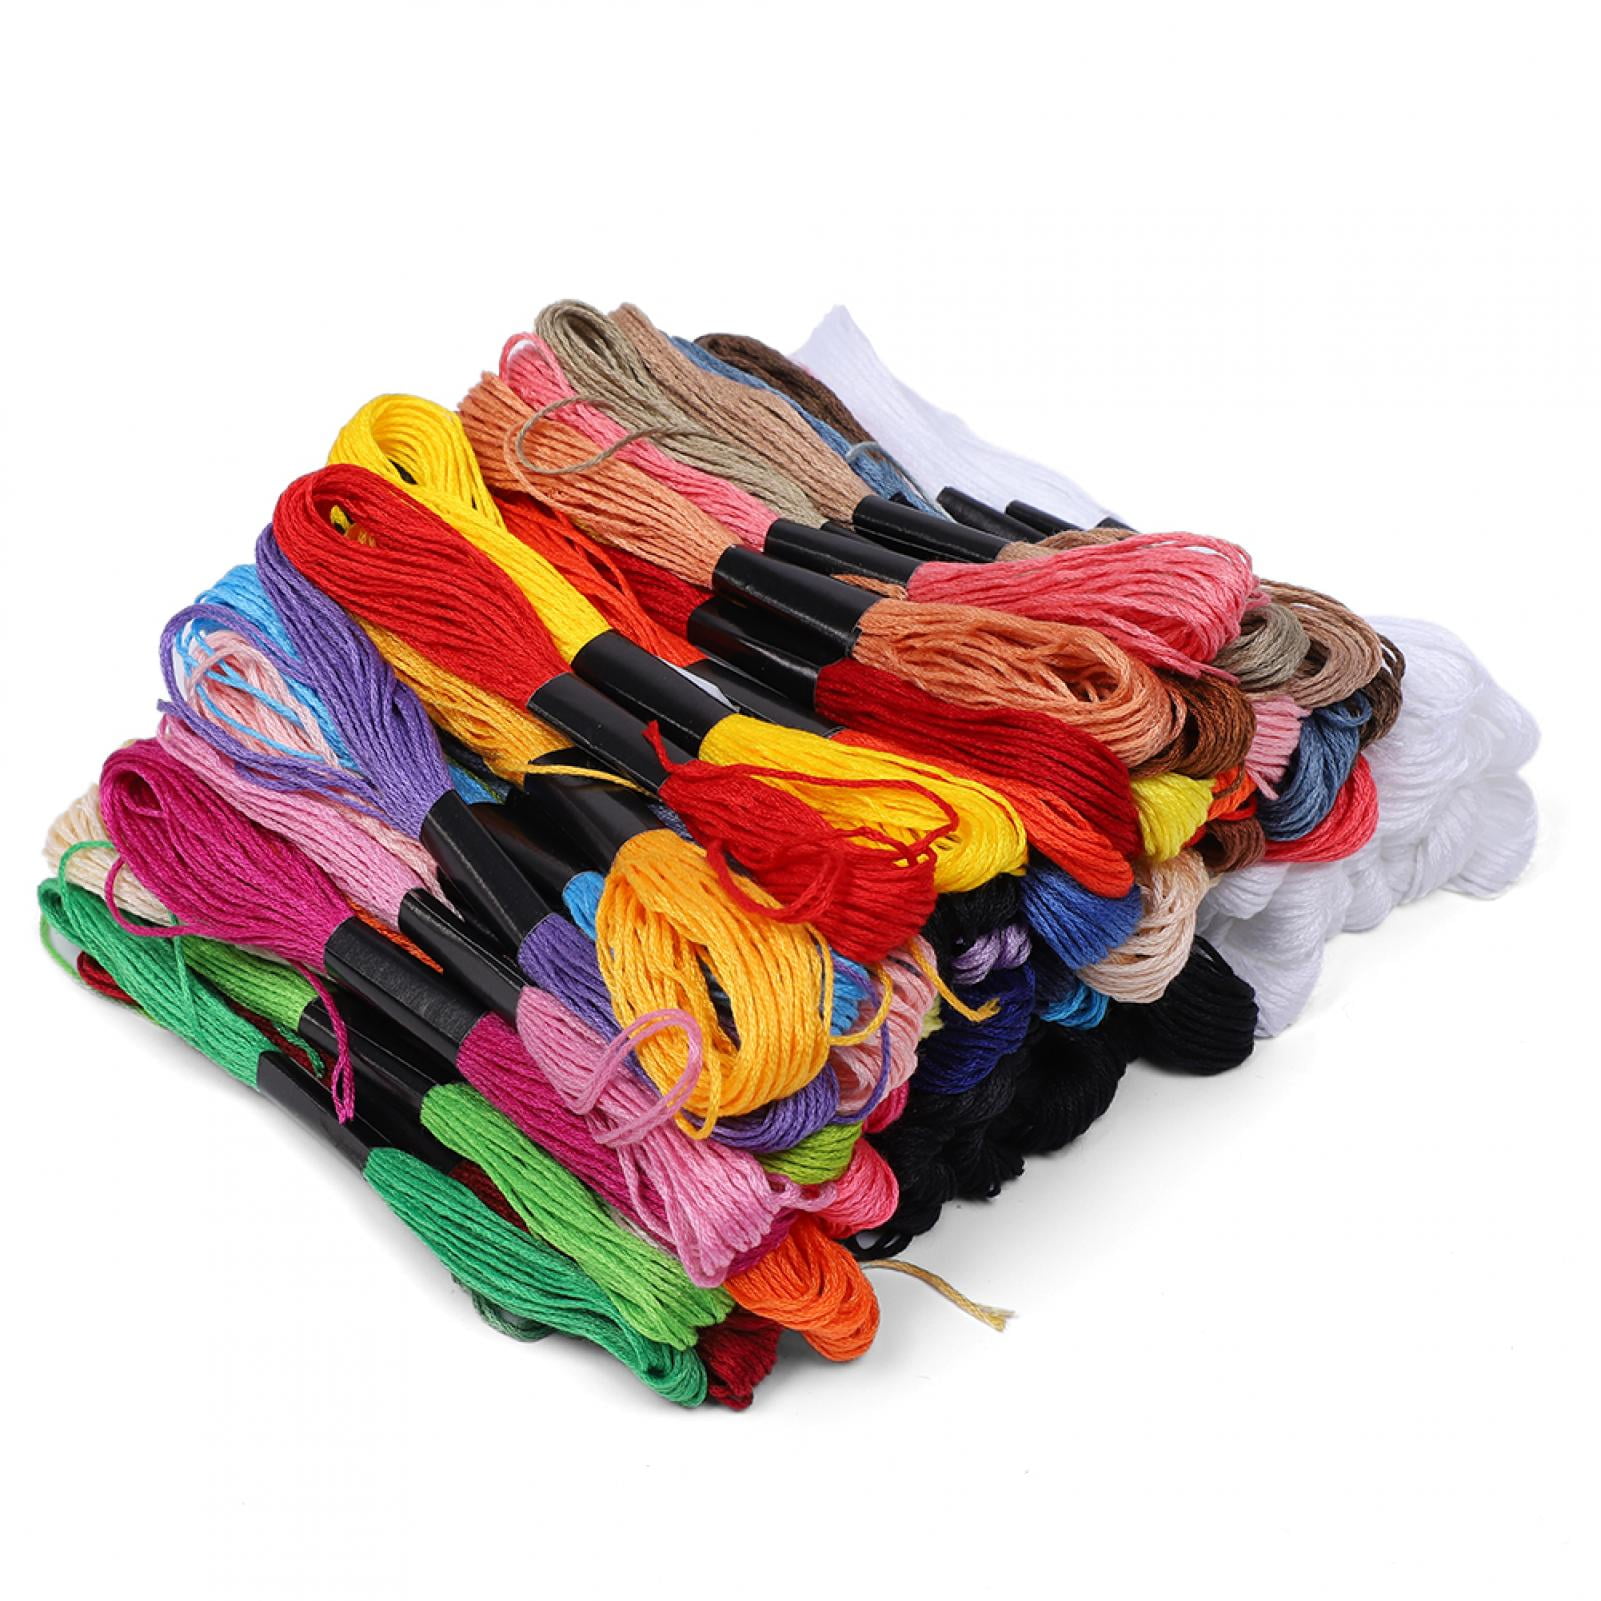 100 Colors Cross Stitch Crafts Floss Threads Kit Rainbow Color Cotton Embroidery  String Bracelet Yarn Set 